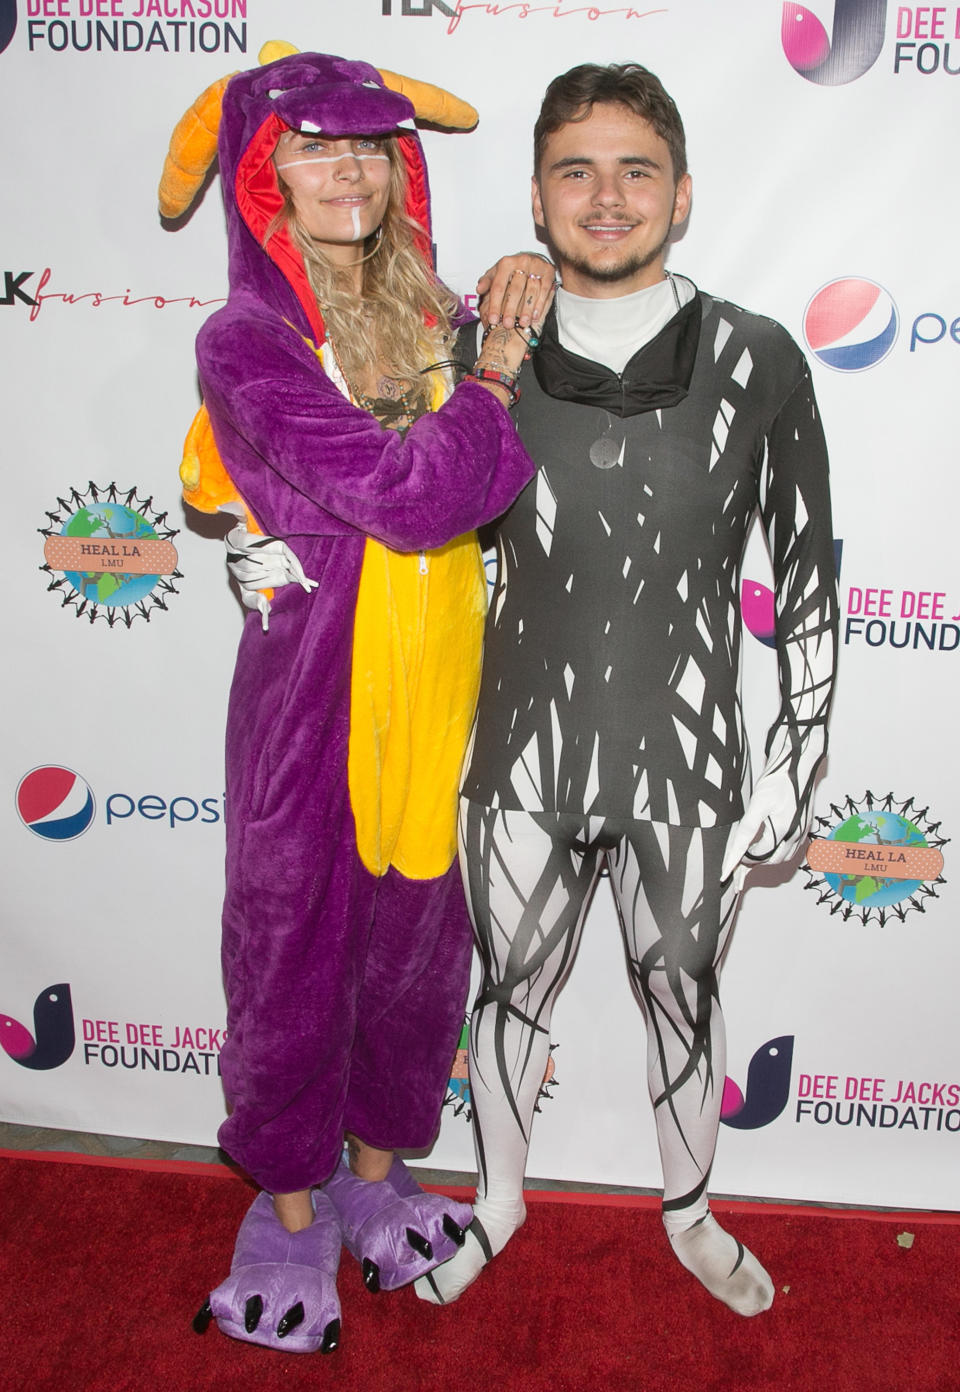 <p>Michael Jackson’s children, Prince and Paris, hung together for a good cause at a charity costume party, which was at the Jackson family estate in Encino, Calif. The brother-sister duo kept it casual in some festive onesies. (Photo: Getty Images) </p>